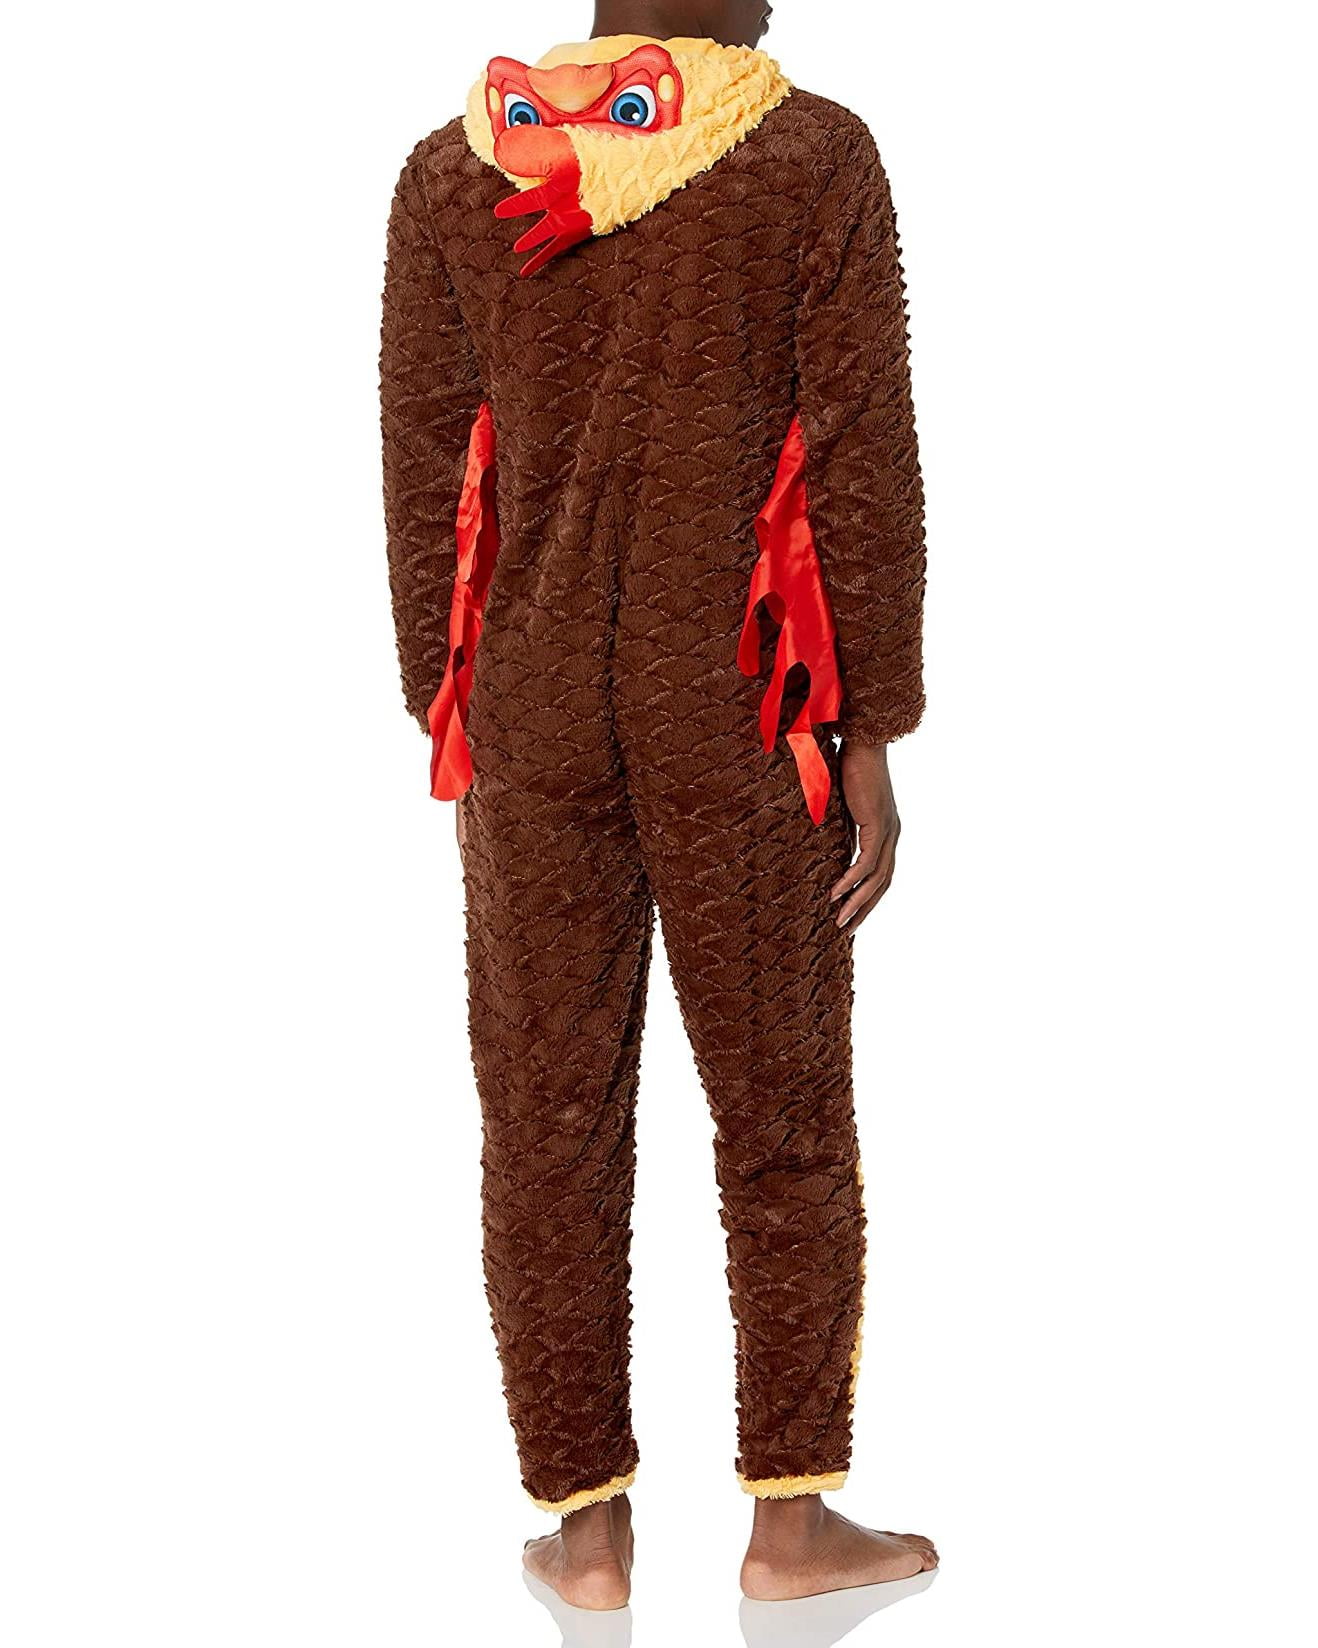 Briefly Stated Rule The Roost Mens Rooster Union Suit Pajamas Sleep   Lounge Novelty Novelty  More originsofwhiskey.com